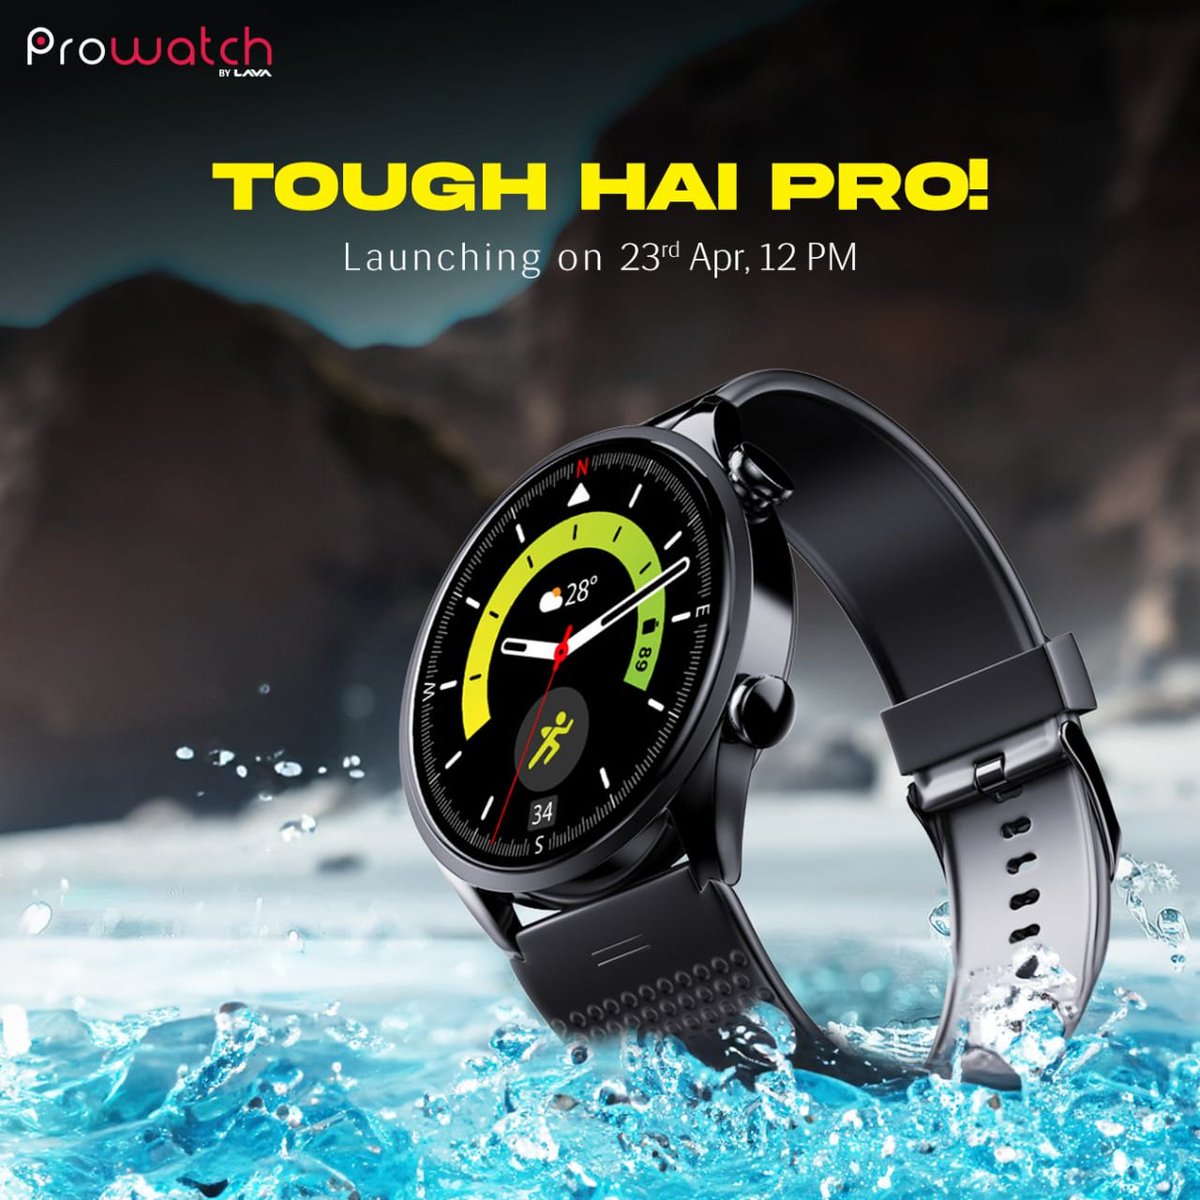 Experience precision and protection like never before! ⌚️ #ProwatchLaunchTomorrow is launching on April 23rd, setting new standards in wearable tech.